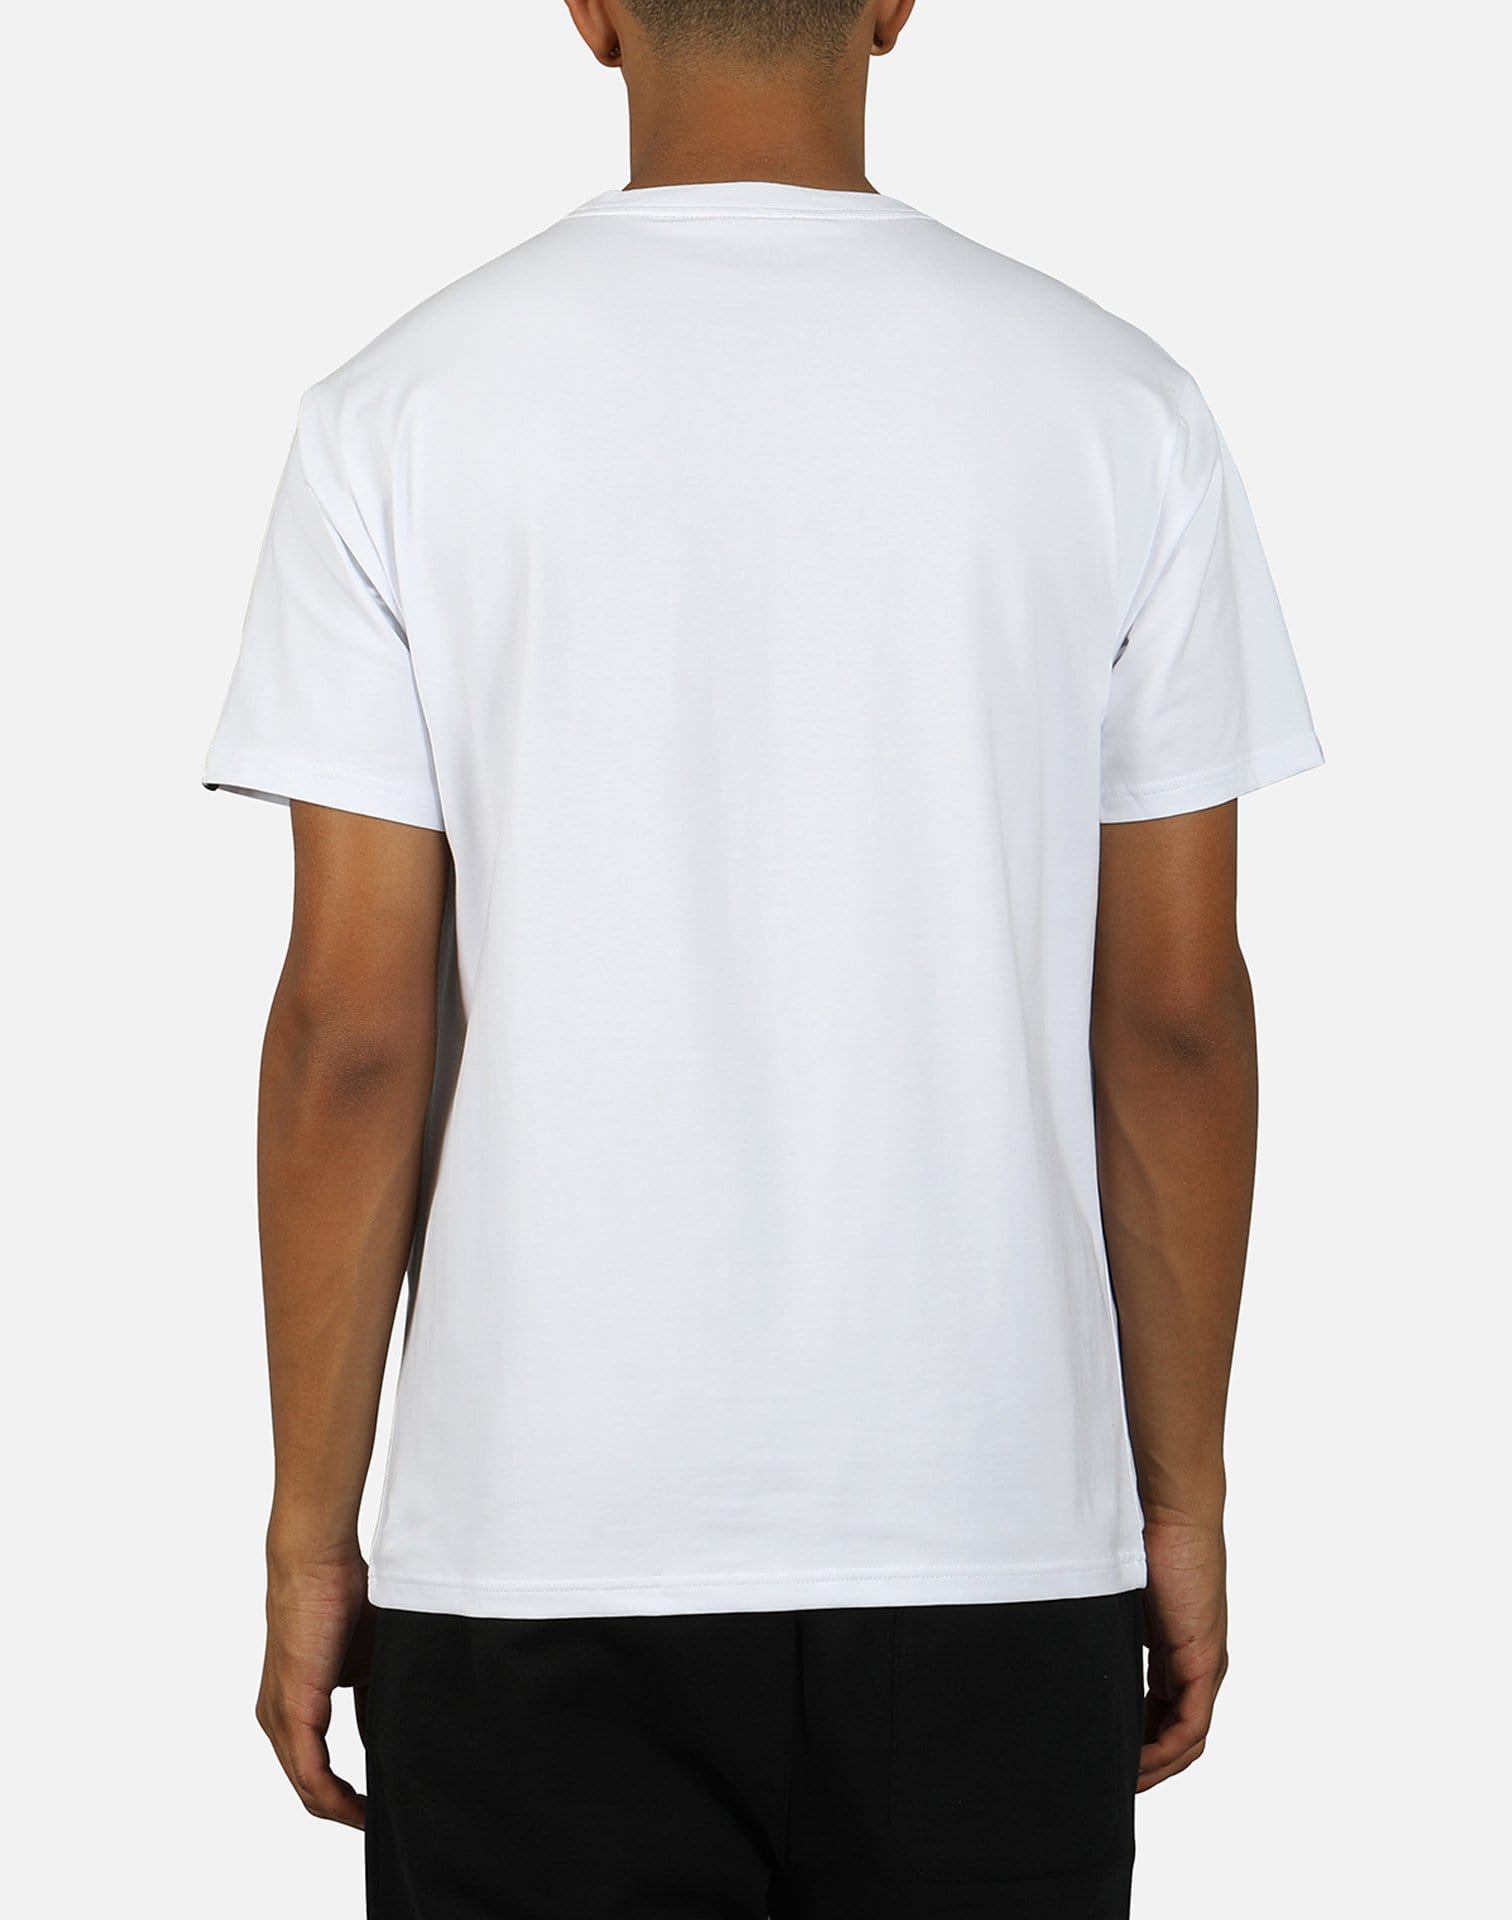 K and S Men's Motivation Tee